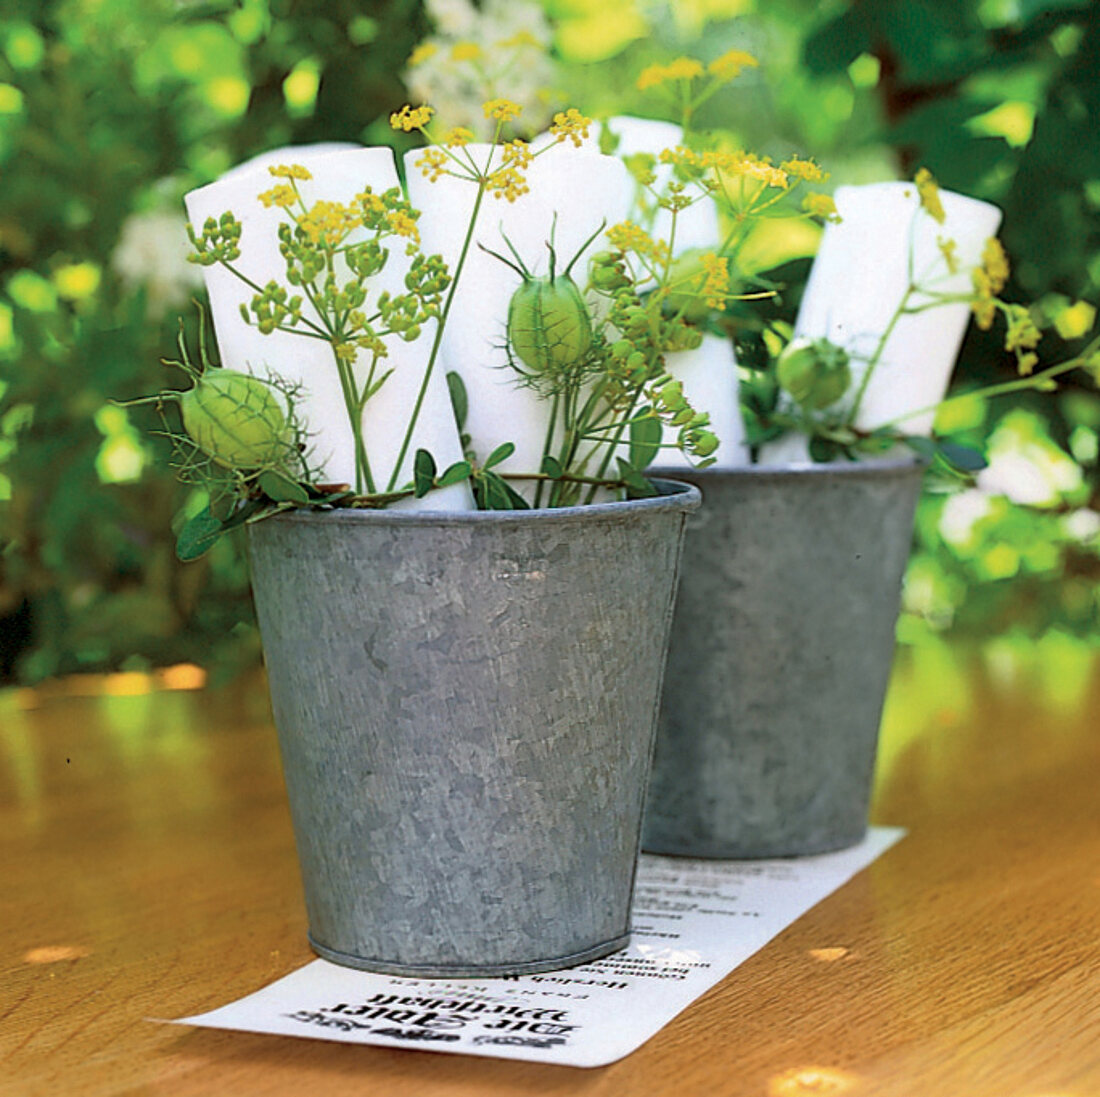 Napkins decorated with fennel blossoms + nigella capsules in a small bucket